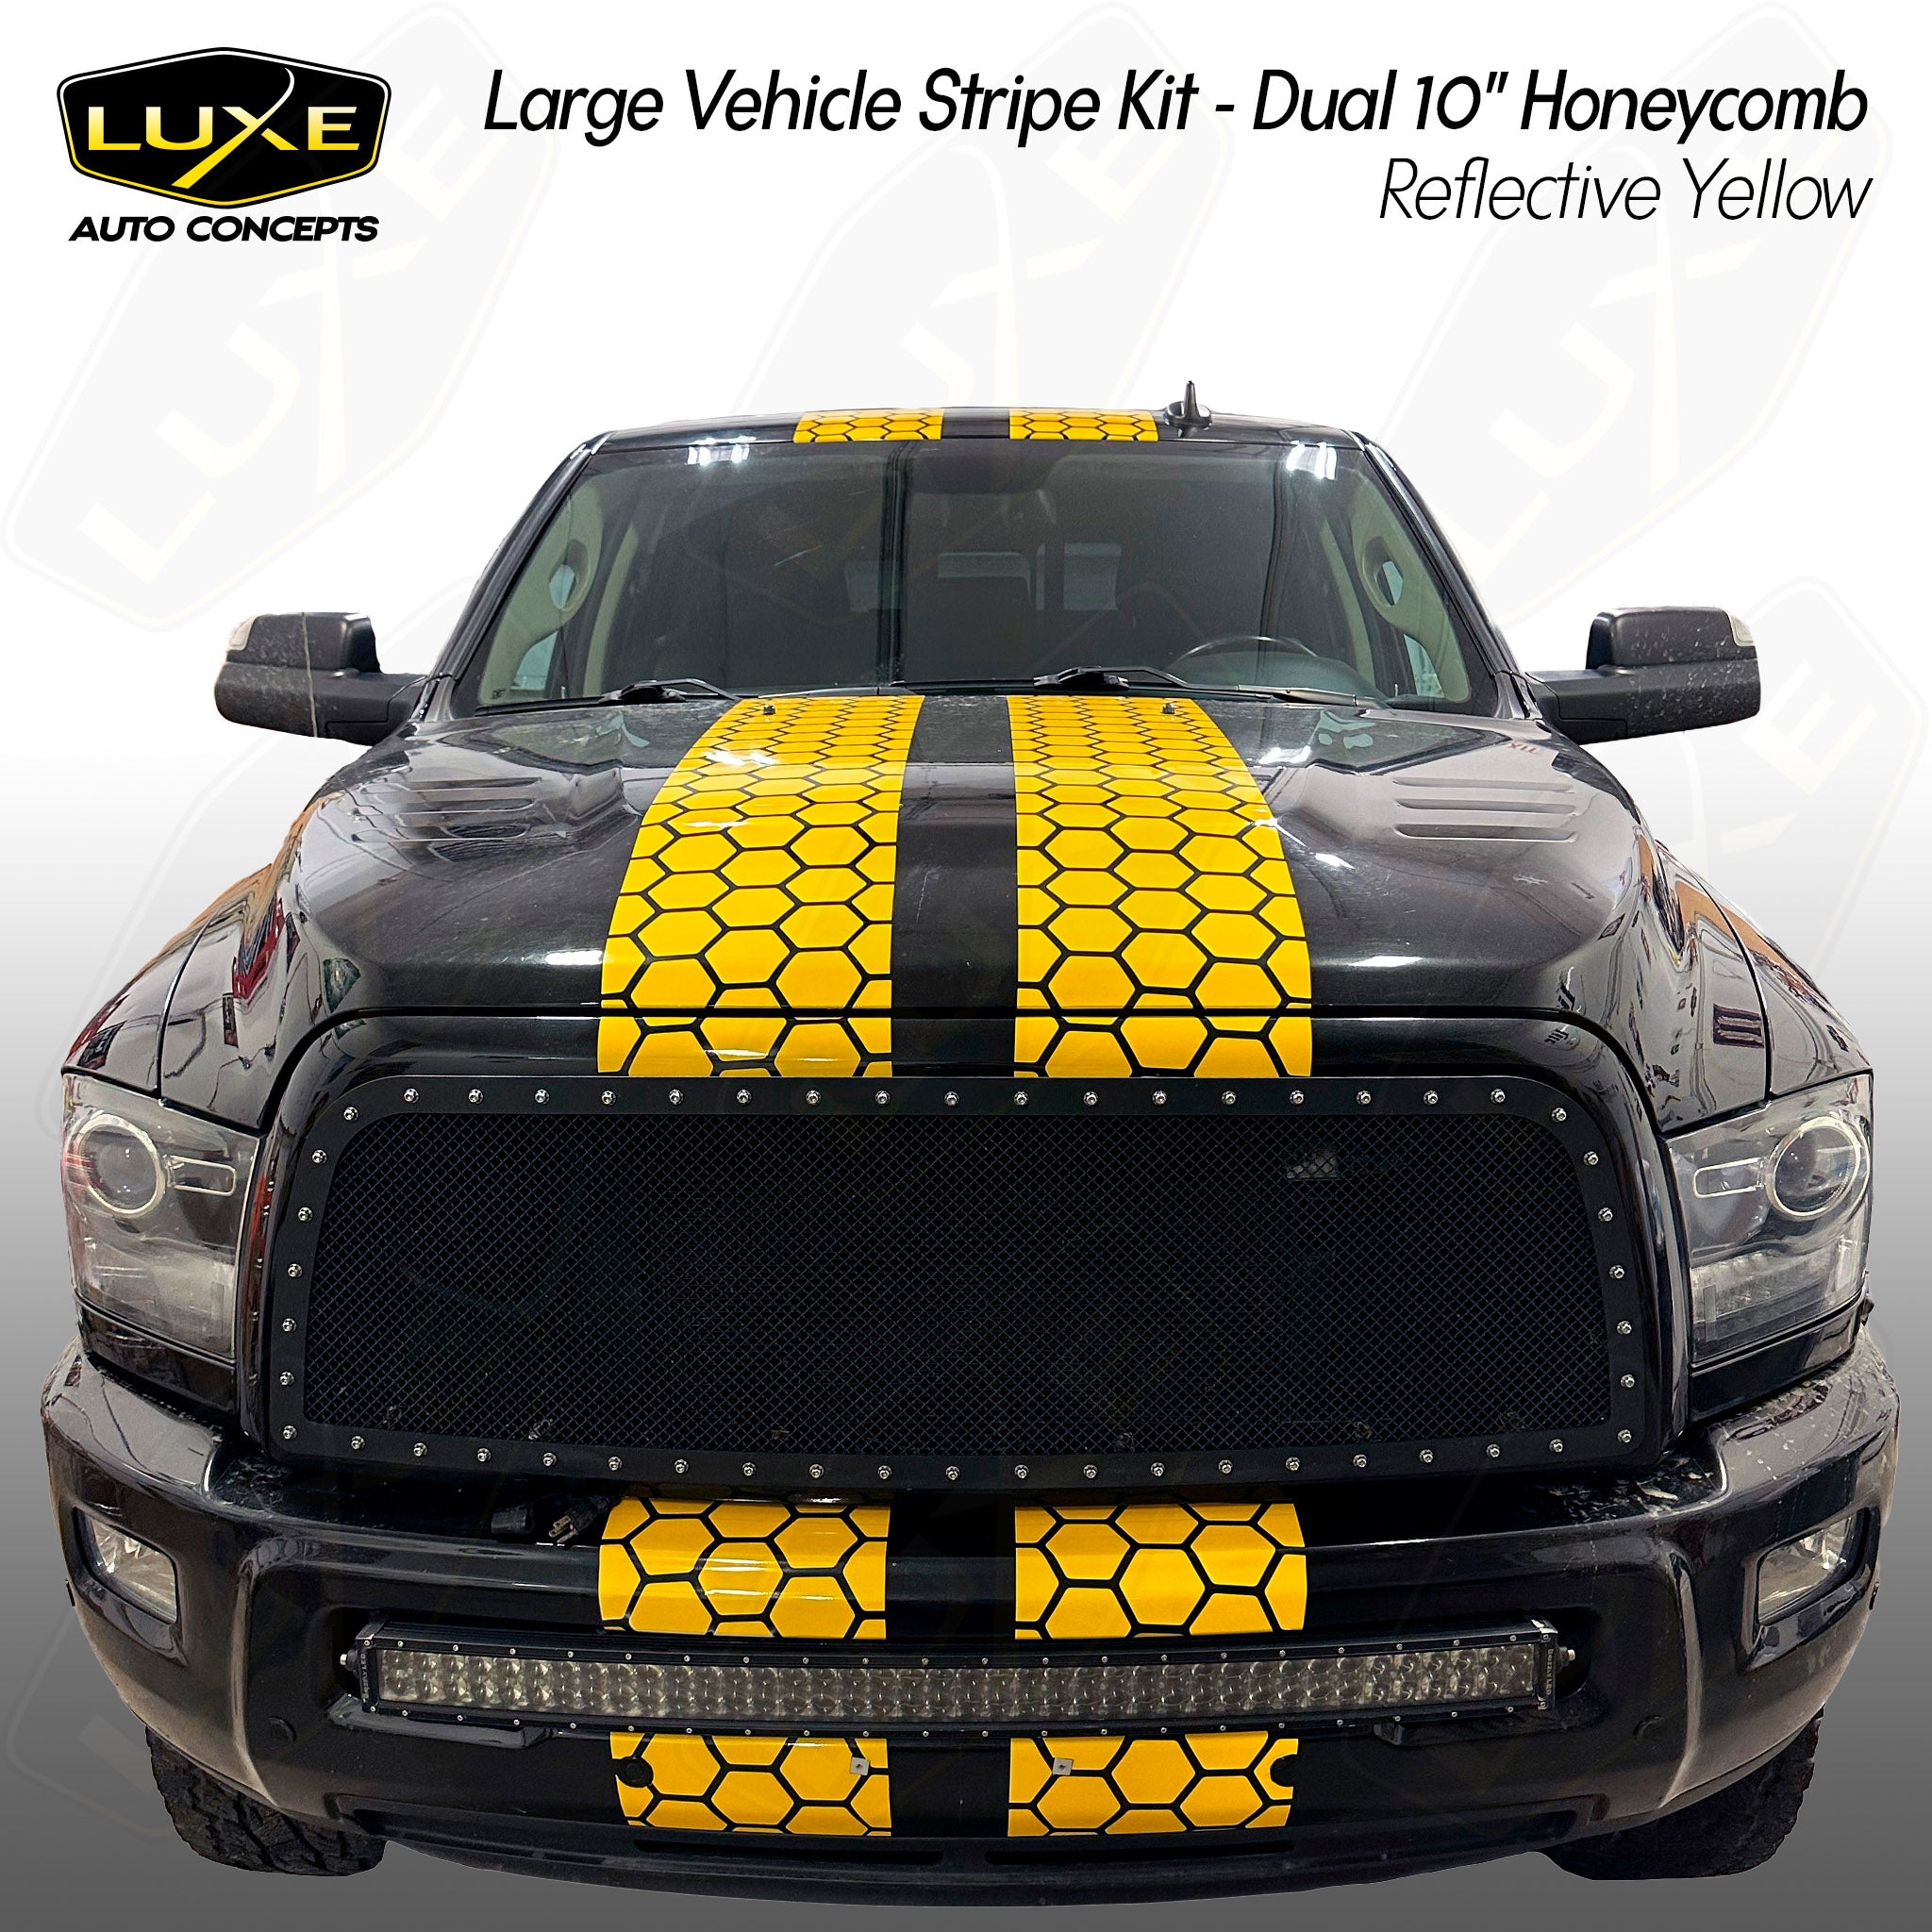 Large Vehicle Stripe Kit Dual 10" Honeycomb — Luxe Auto Concepts